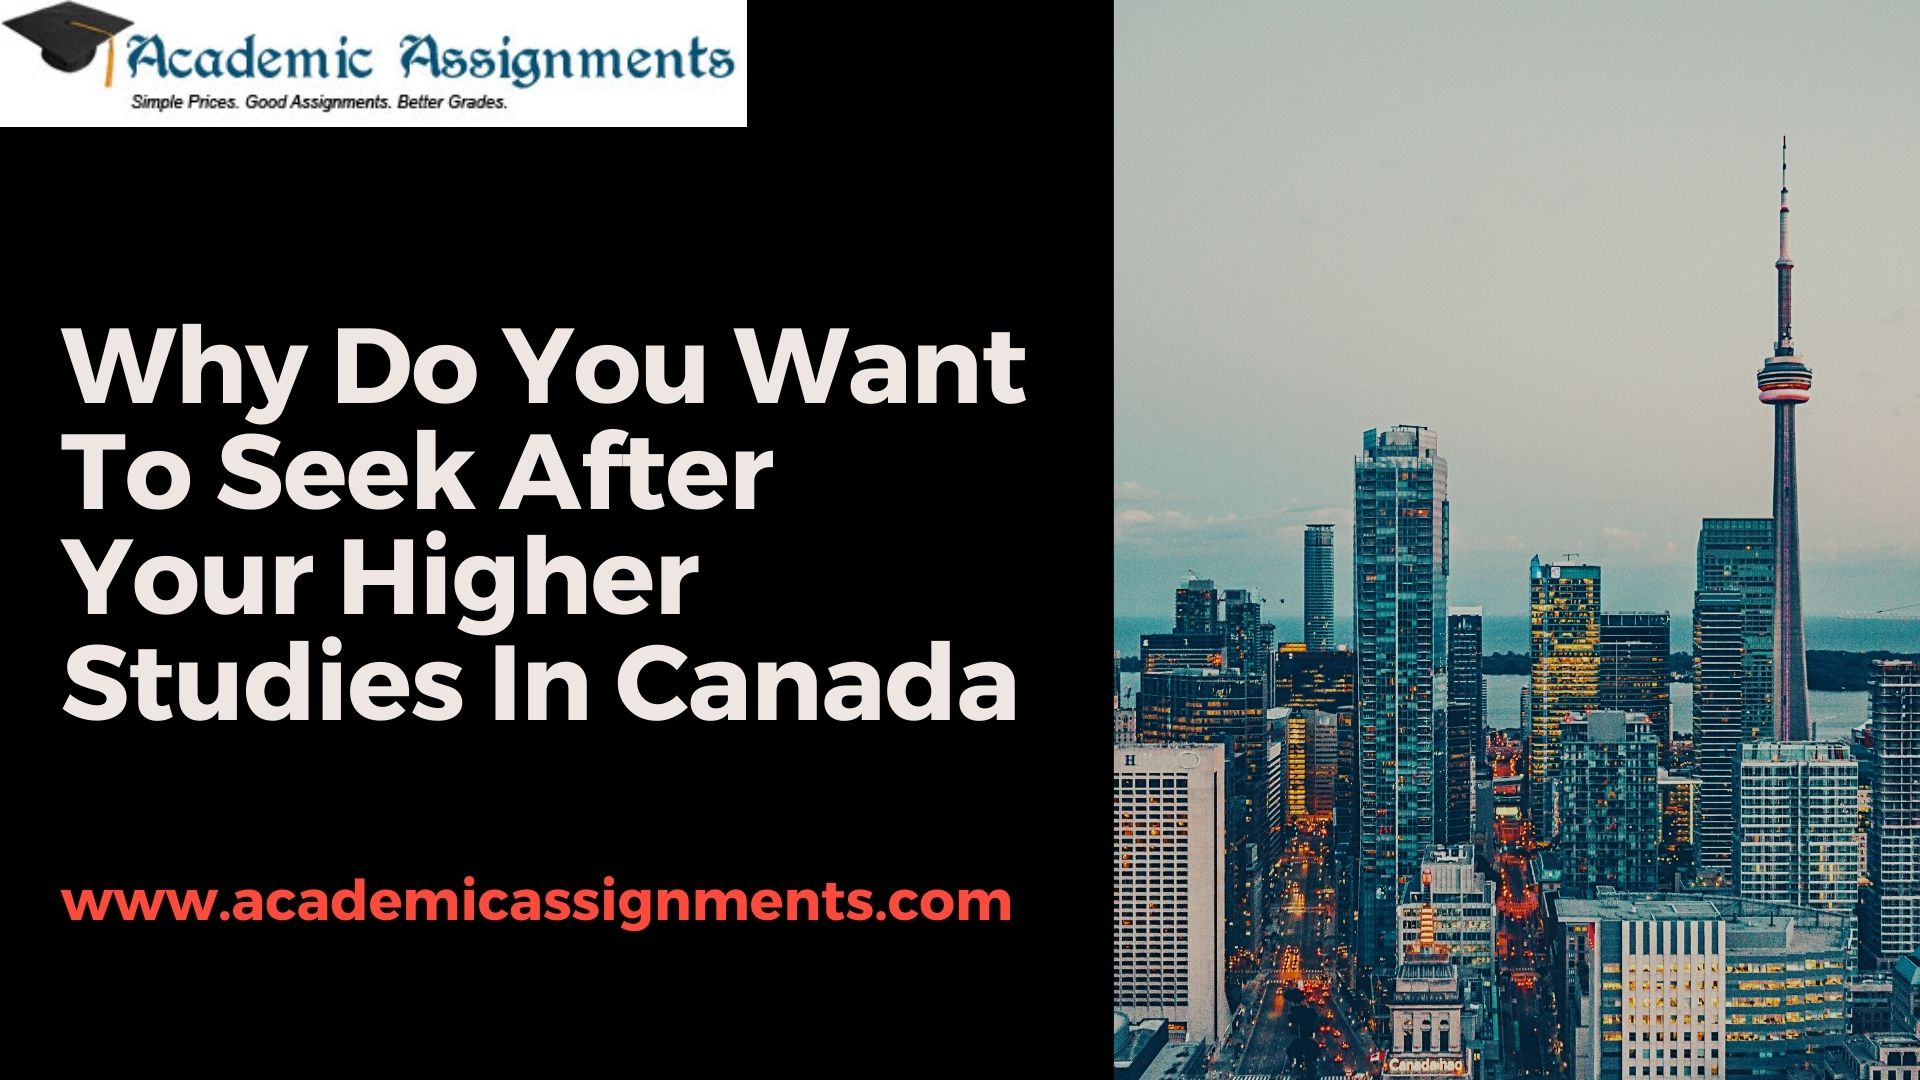 Why Do You Want To Seek After Your Higher Studies In Canada